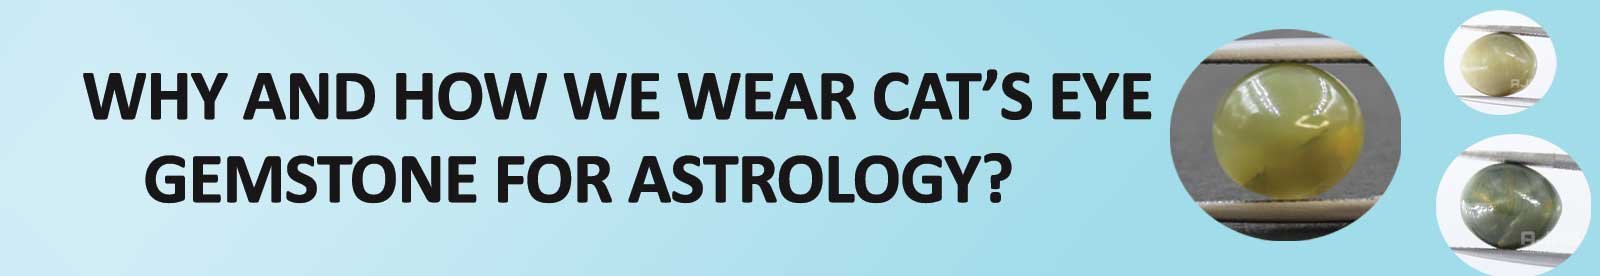 Why and how we wear Cats Eye Gemstone for Astrology?